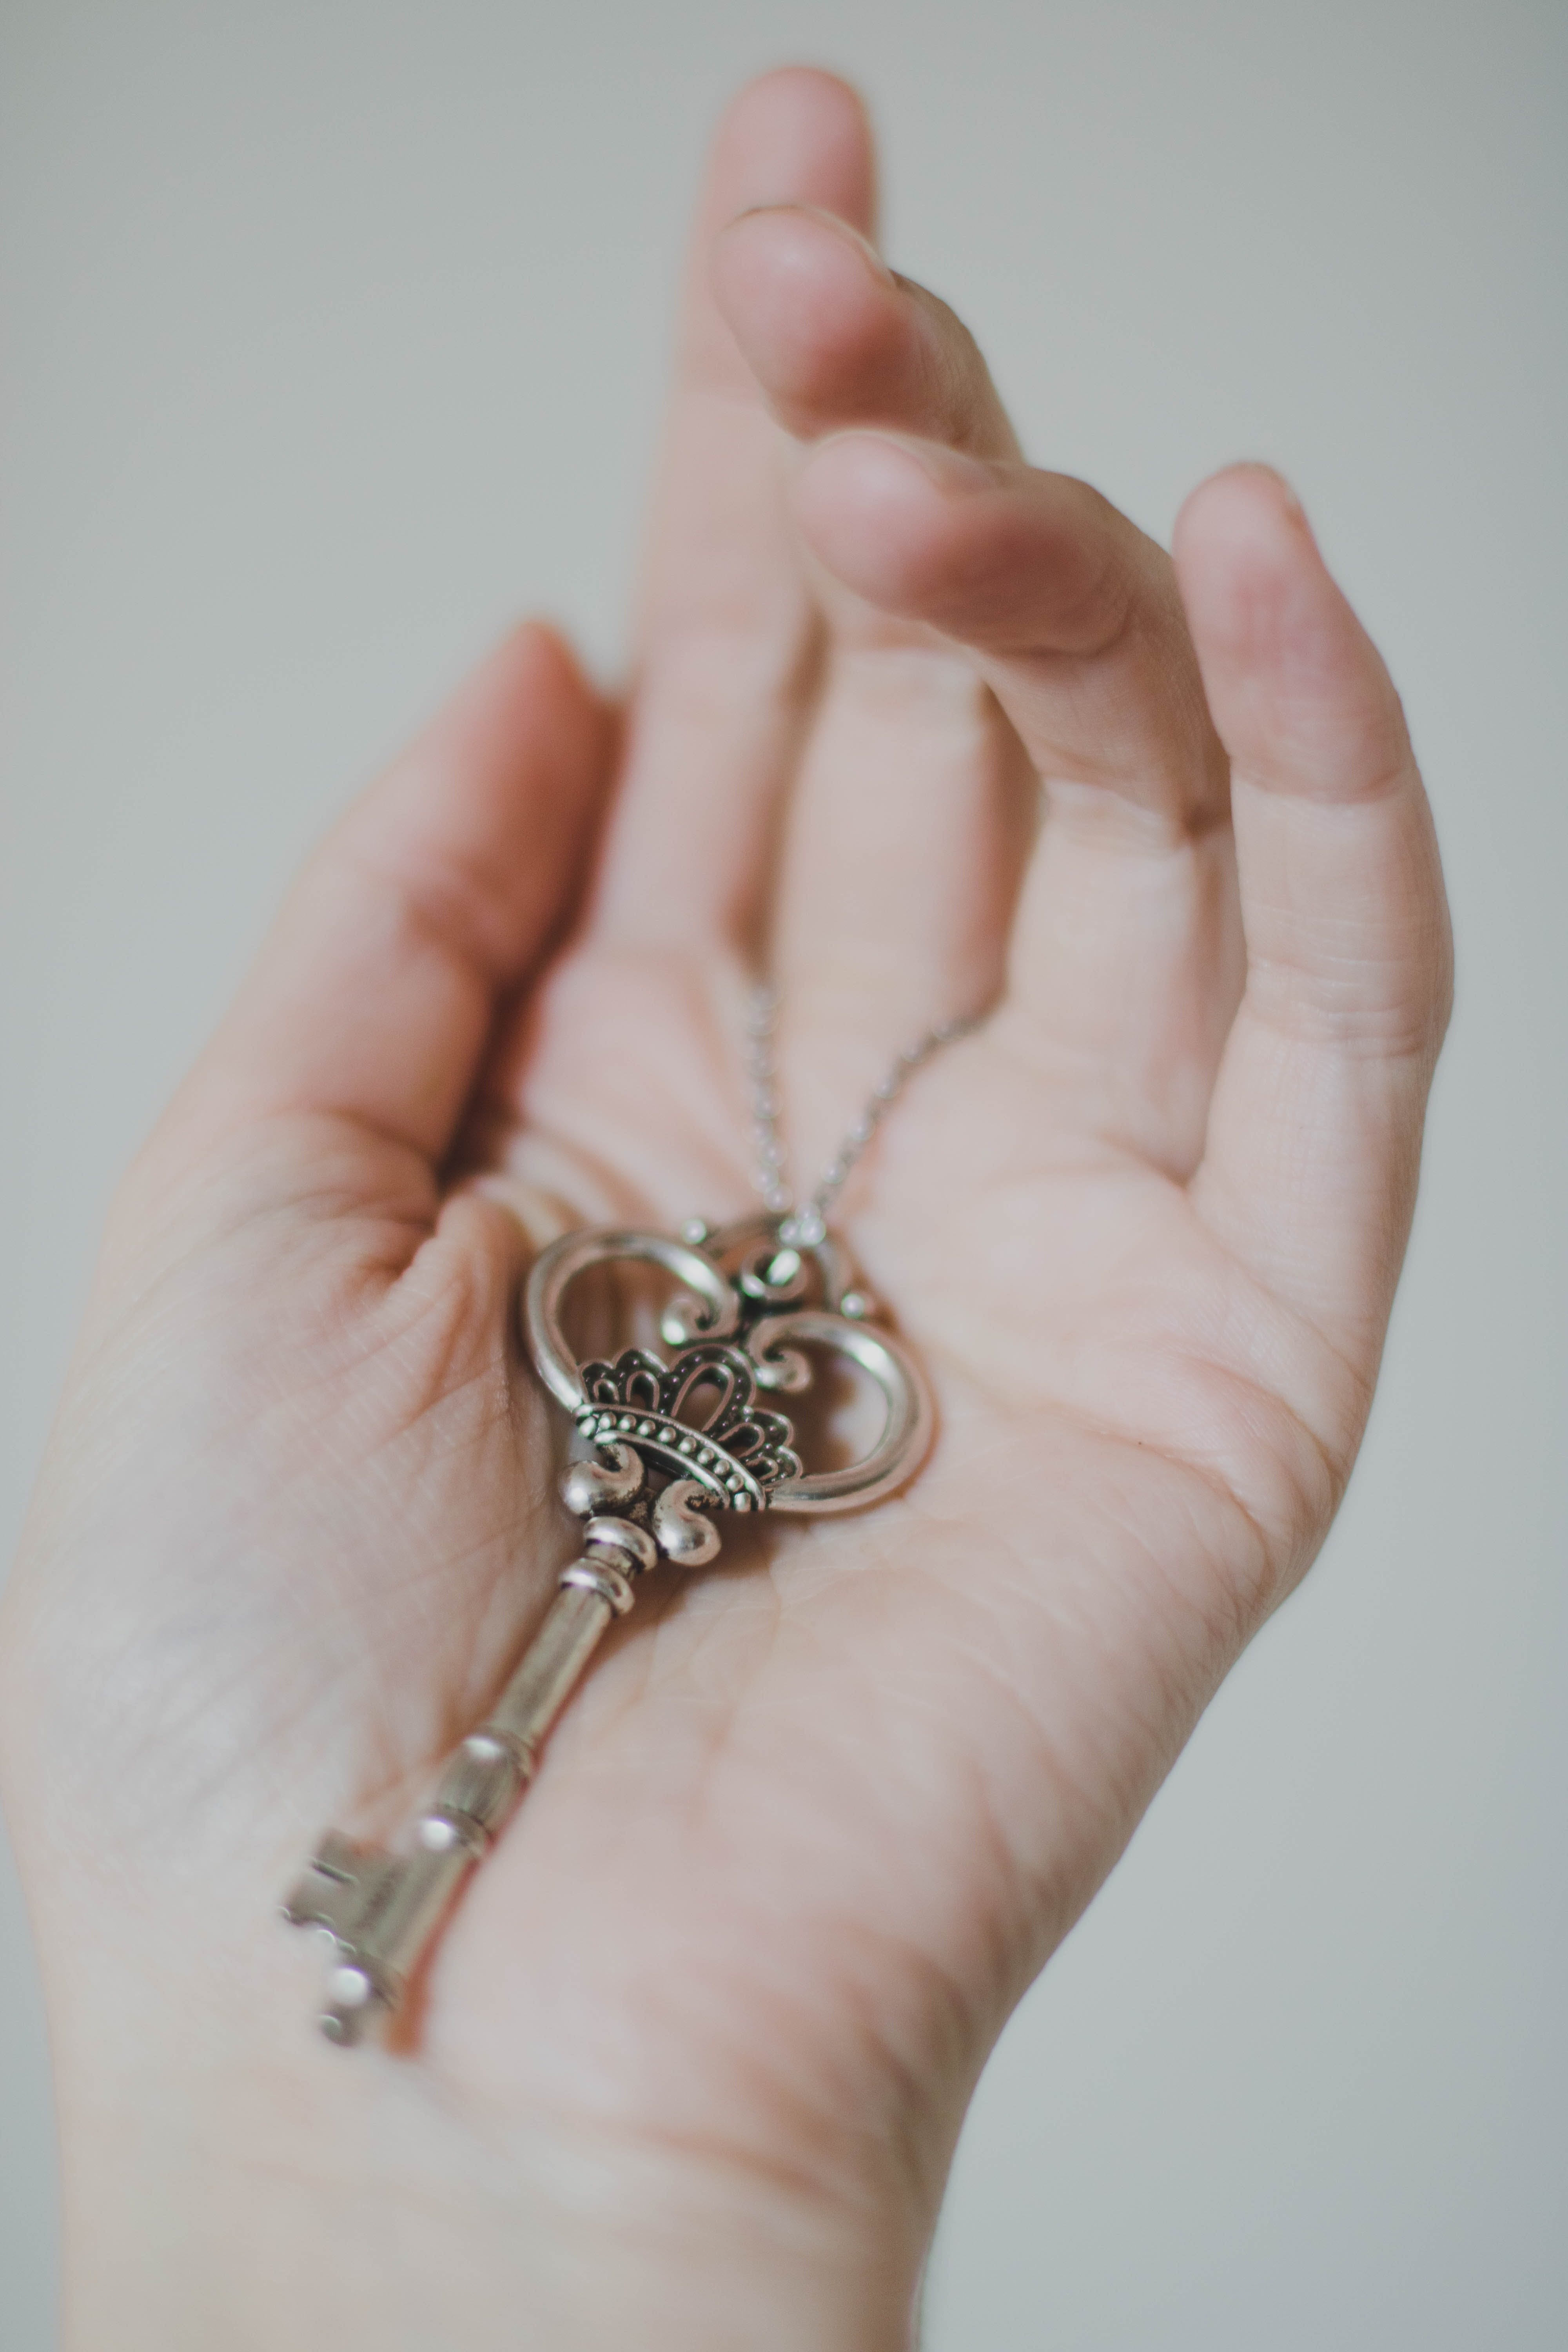 A hand holding a key | Source: Pexels